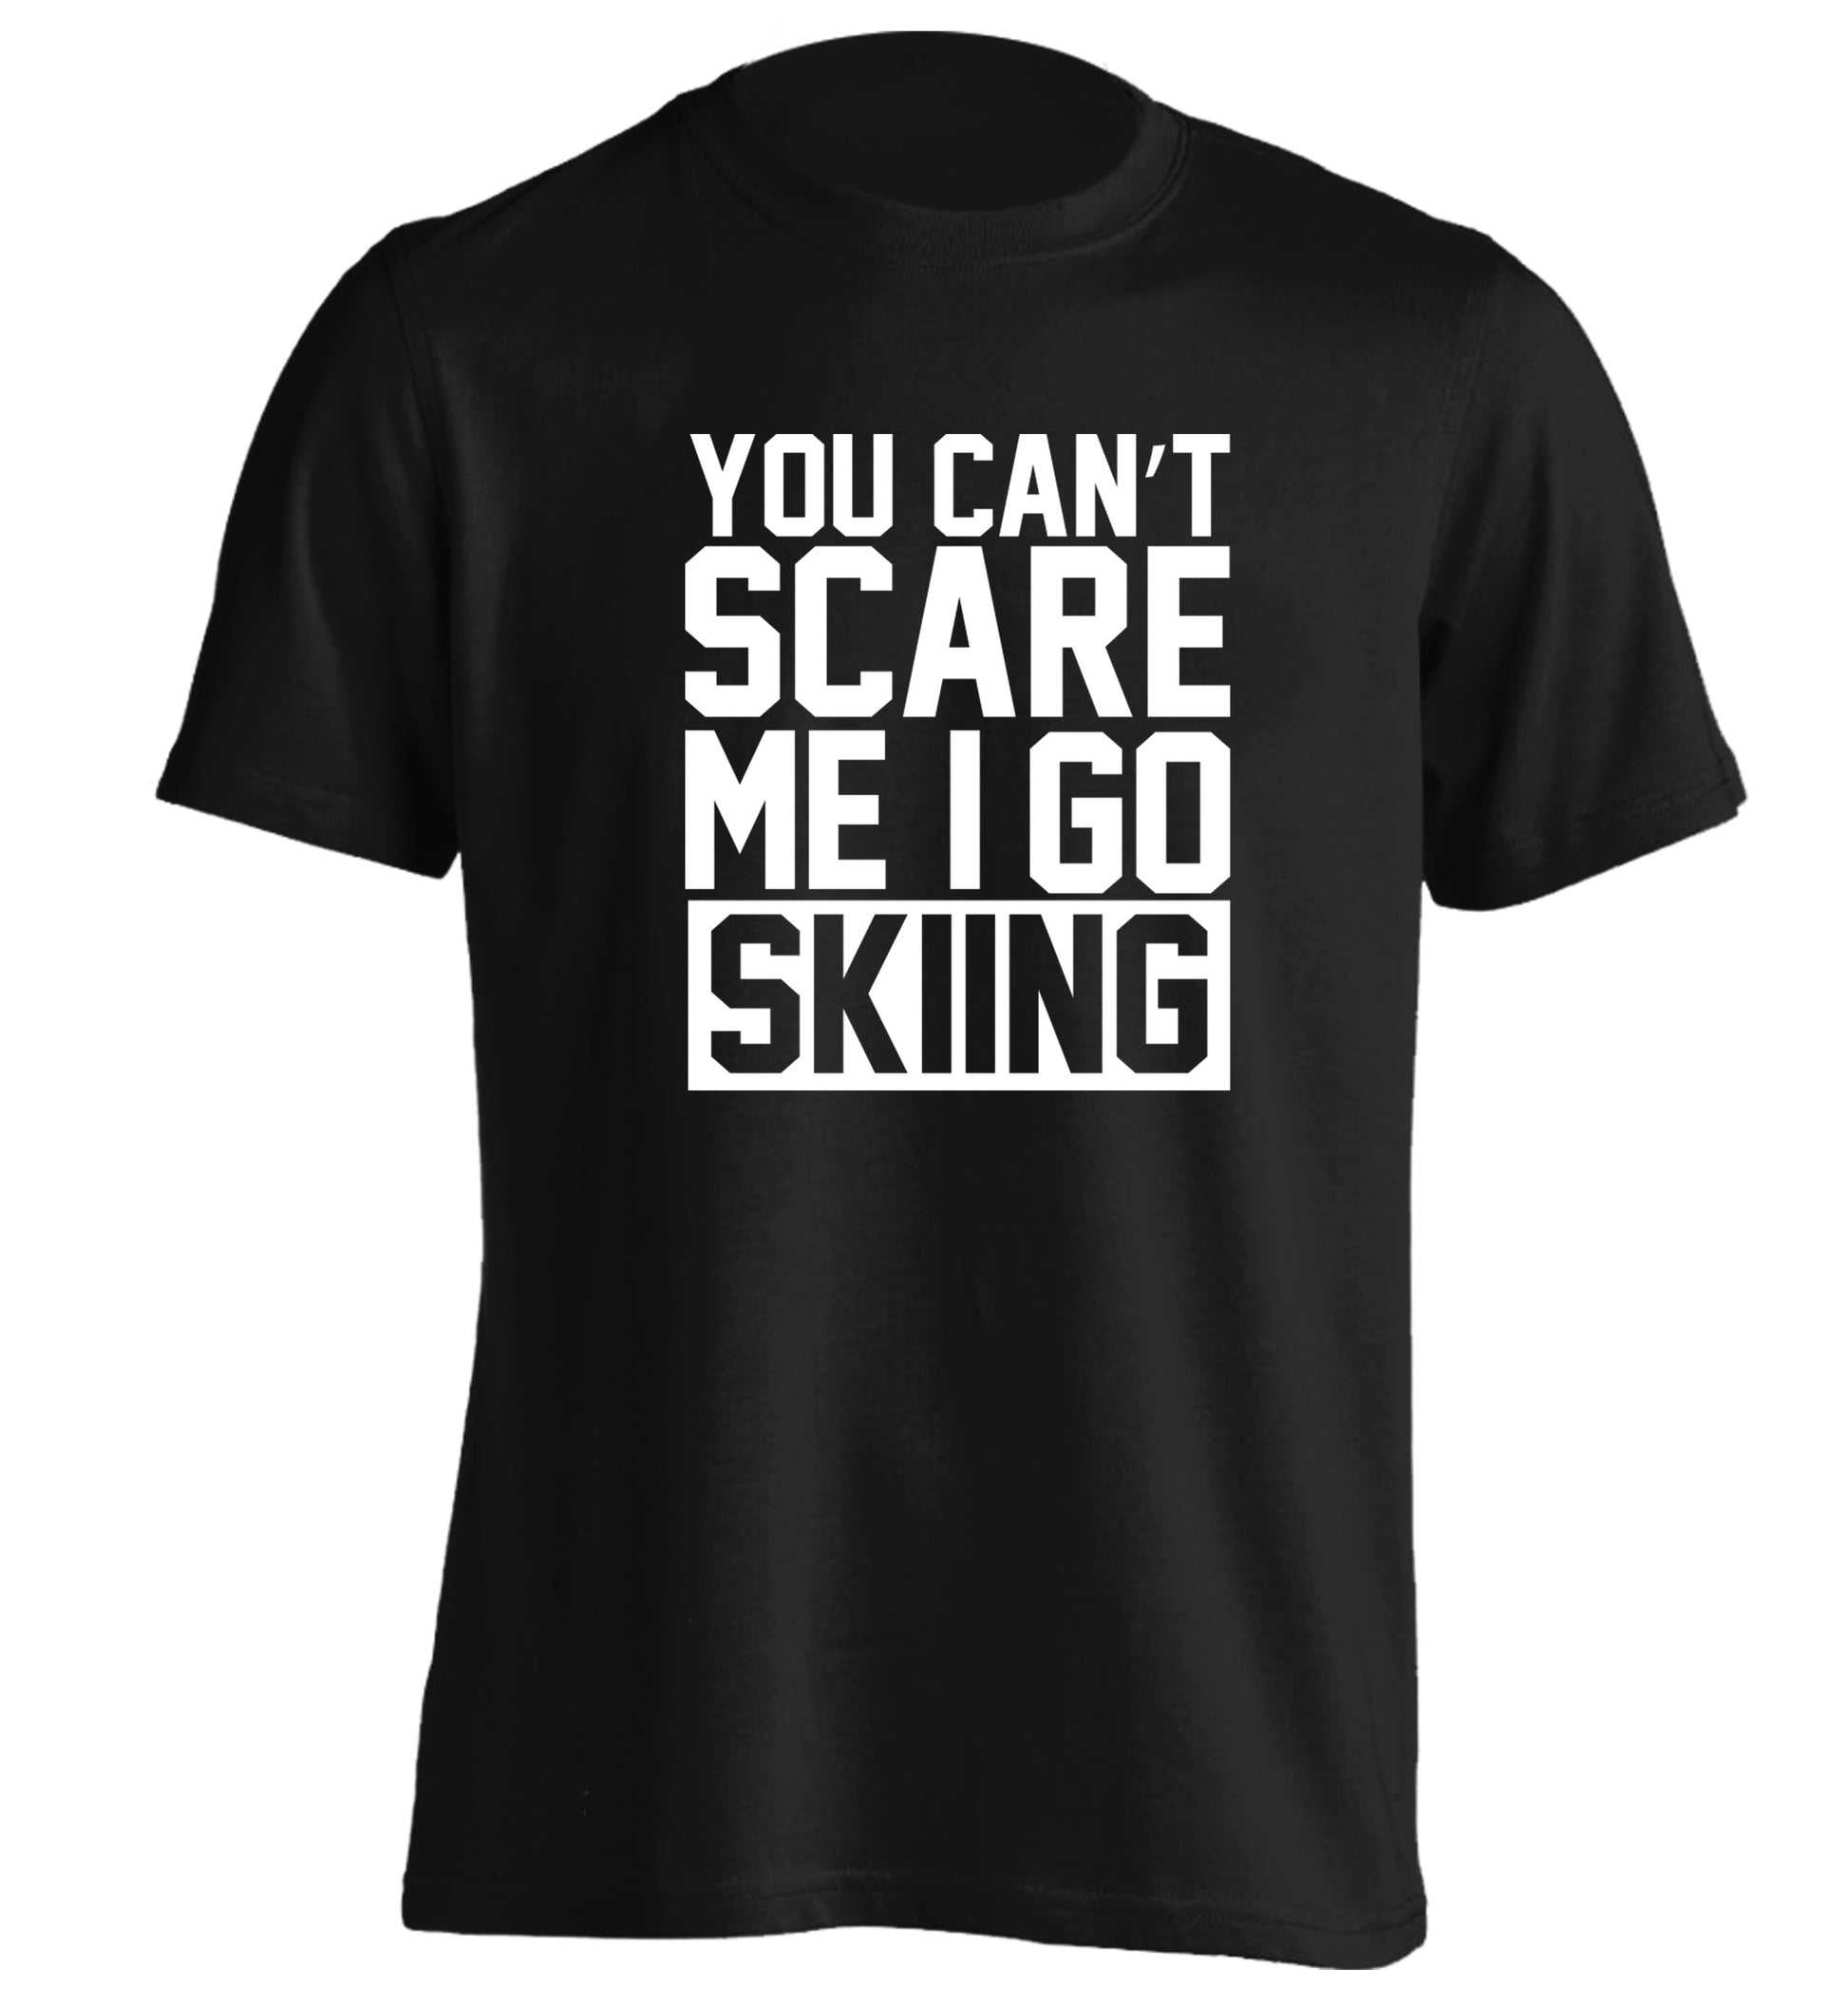 You can't scare me I go skiing adults unisex black Tshirt 2XL